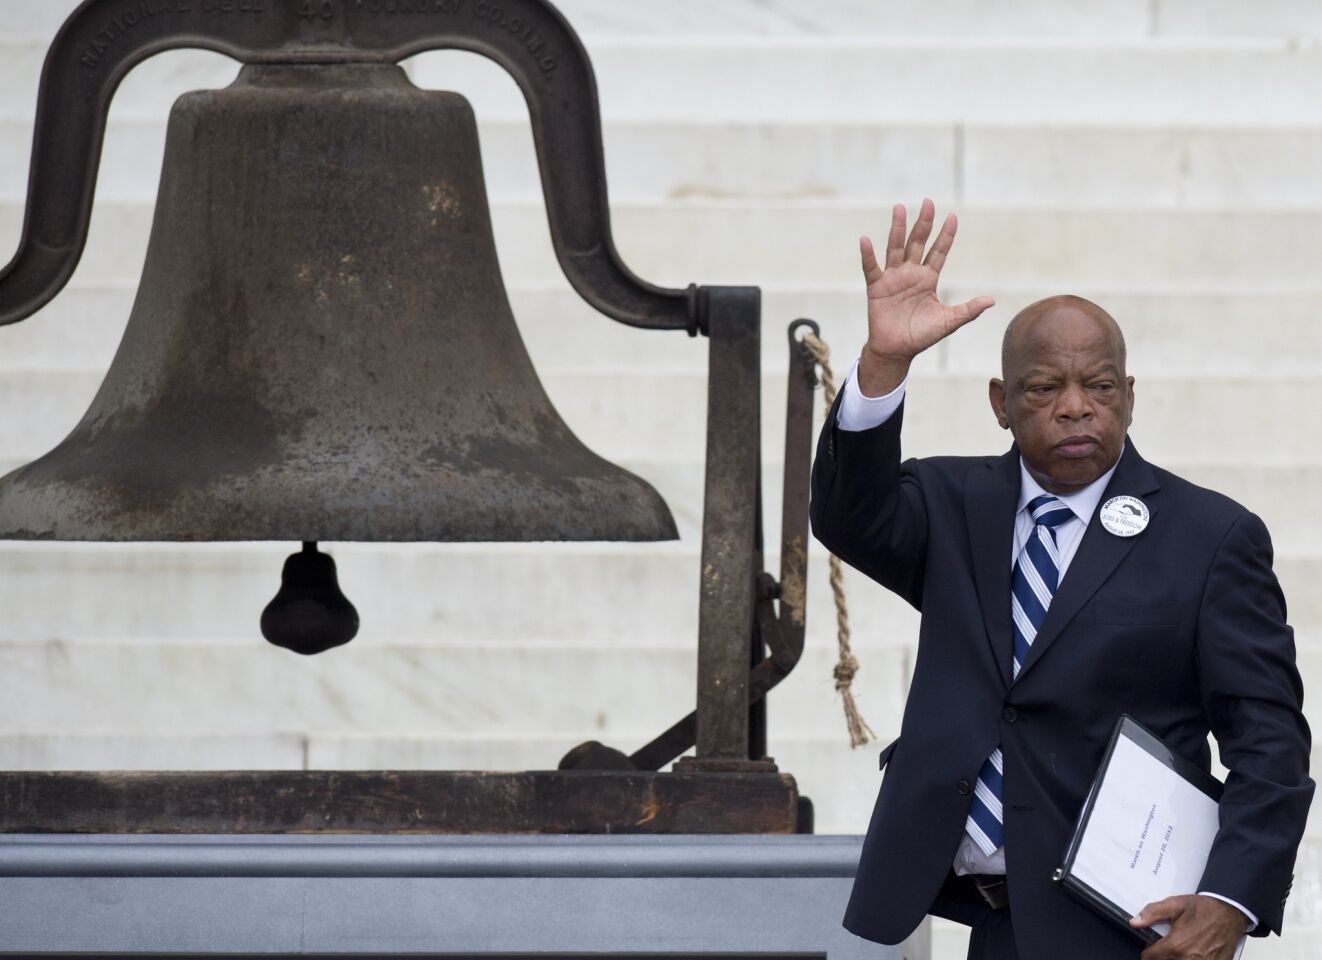 Rep. John Lewis (D-Ga.) waves to the crowd during the commemoration of the 50th anniversary of the March on Washington.